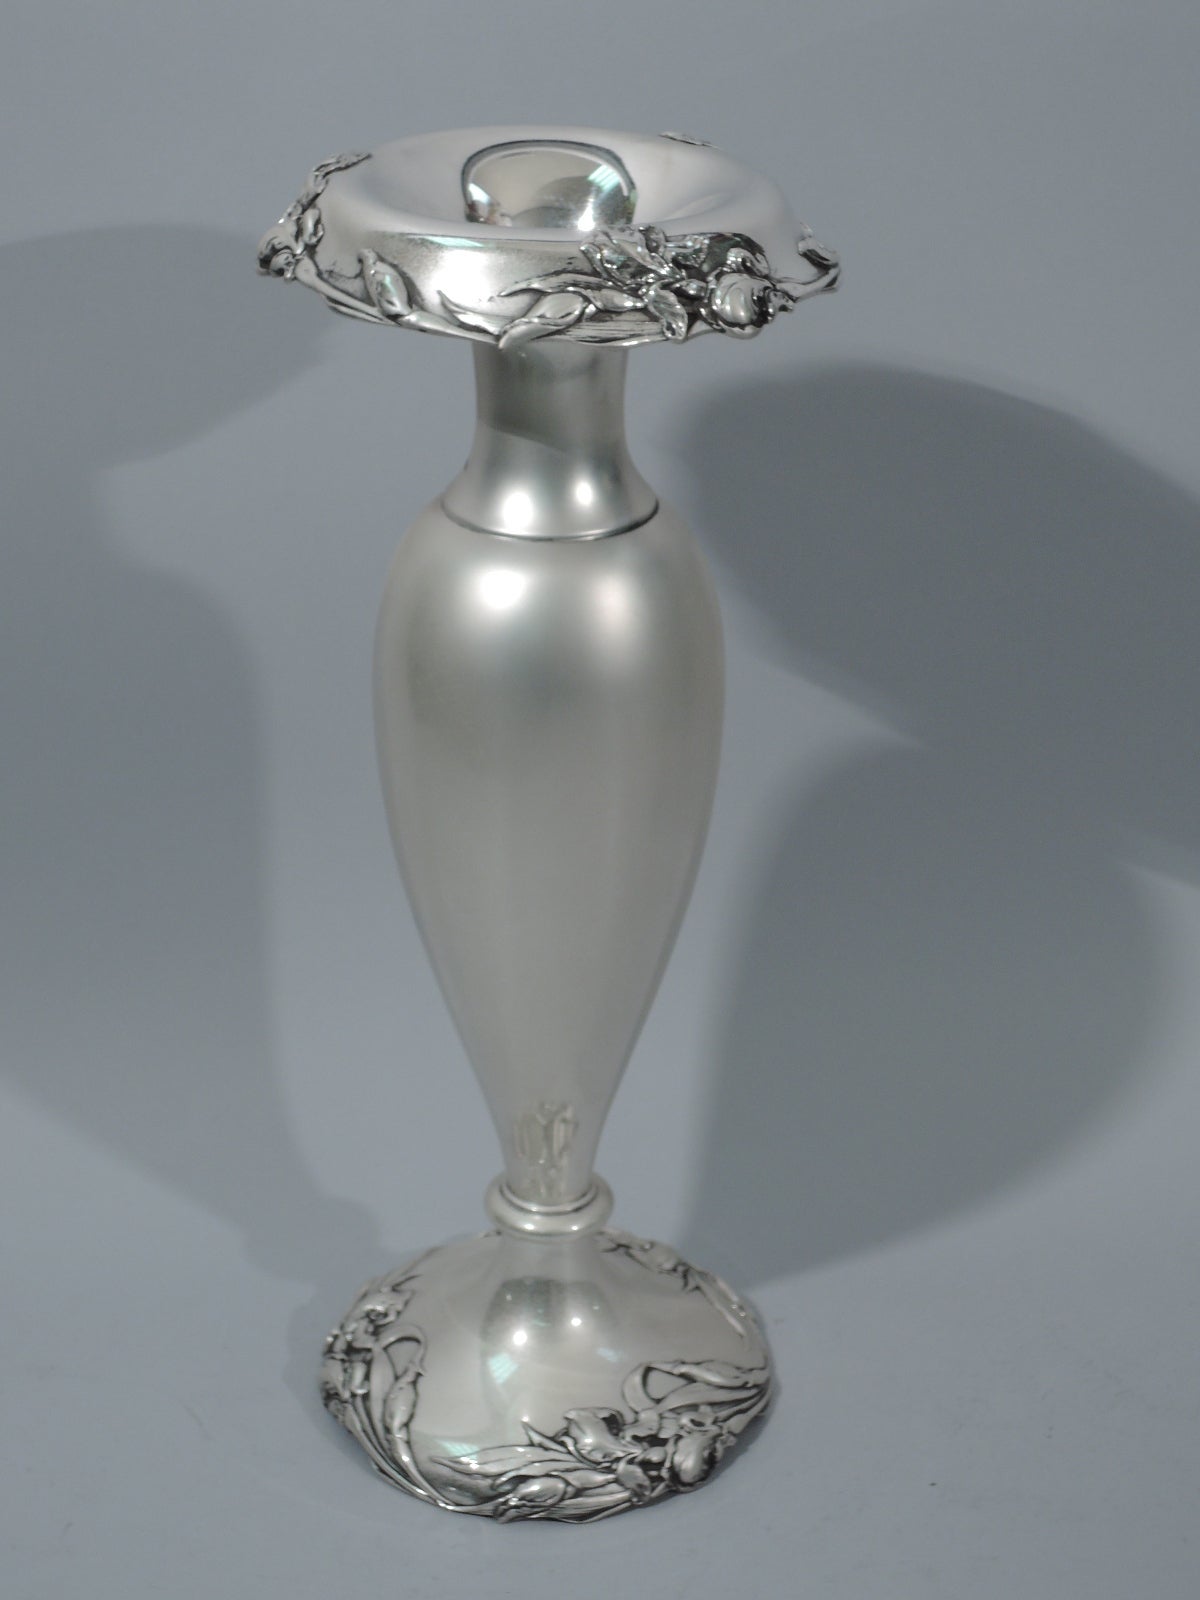 Art Nouveau sterling silver vase. Made by Reed & Barton in Taunton, Mass., circa 1900. Ovoid body terminating in knop on raised foot. Cylindrical neck, narrow mouth and turned down rim. Scattered flowers applied to rim and foot. Hallmark